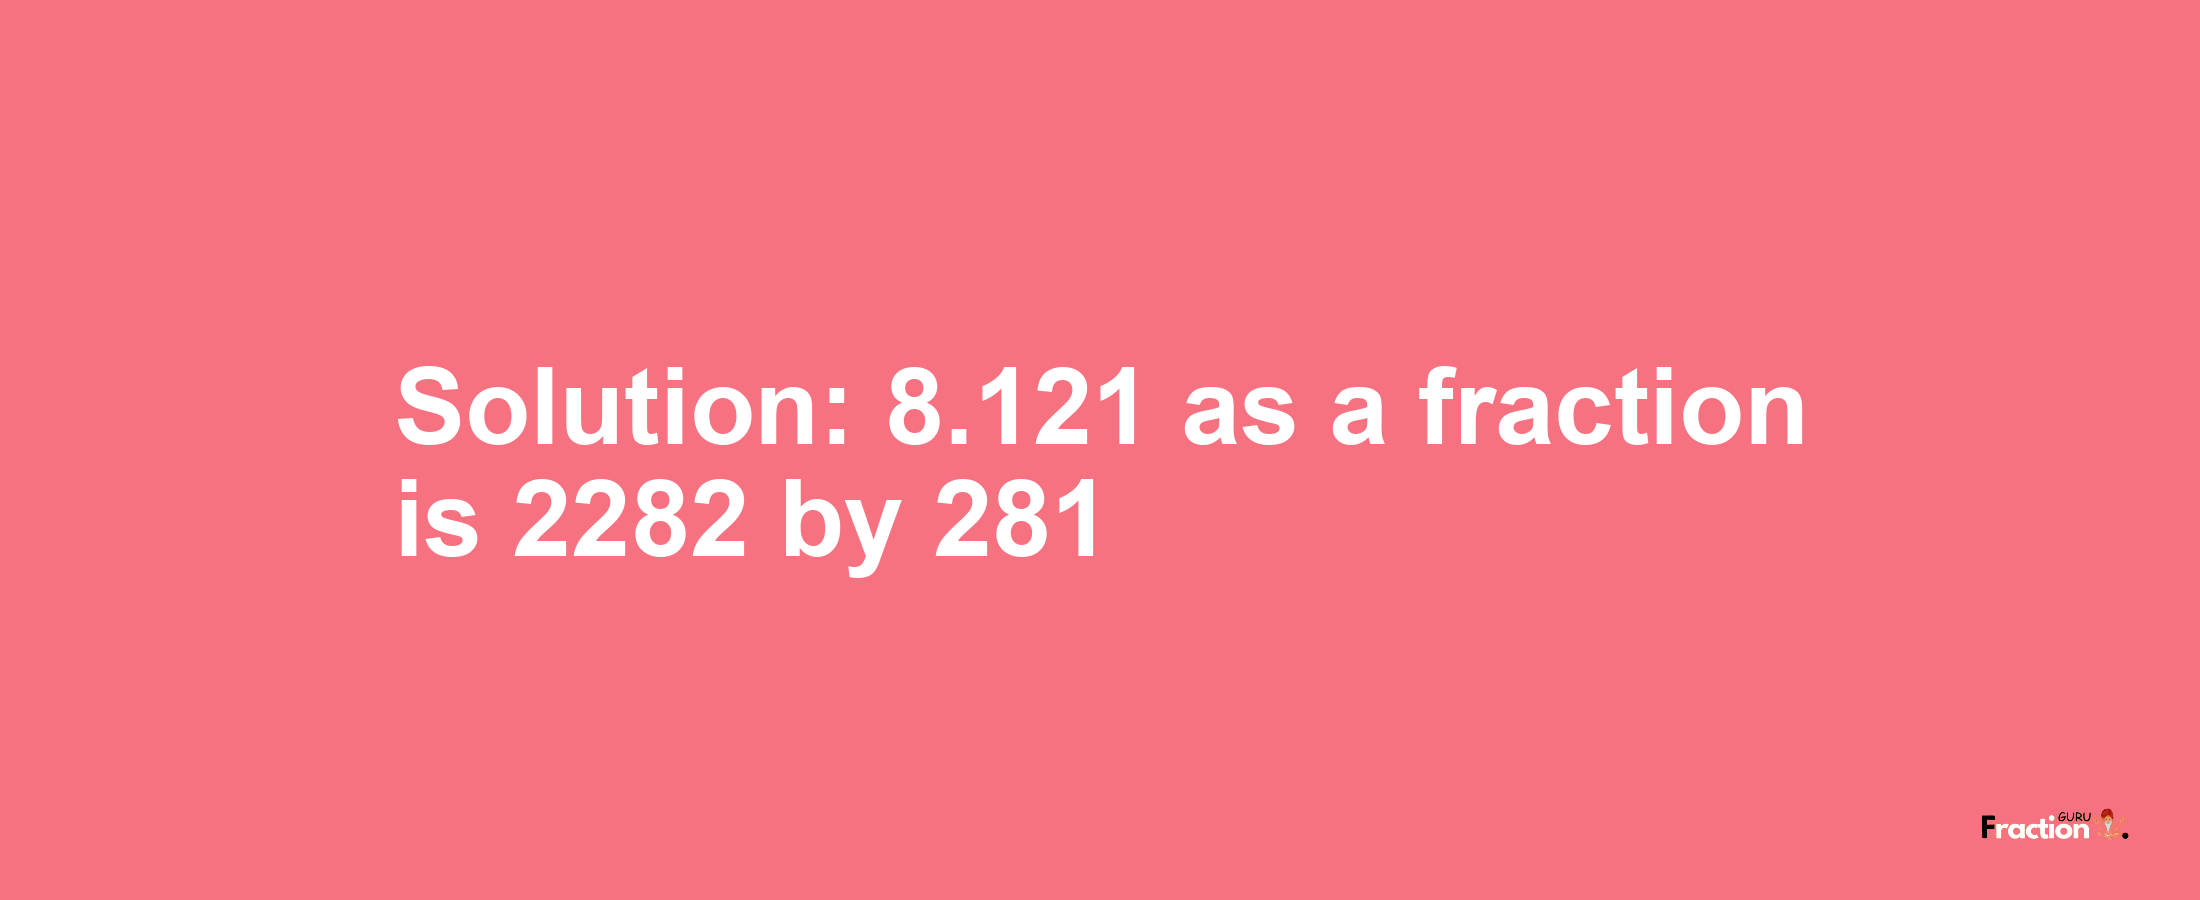 Solution:8.121 as a fraction is 2282/281